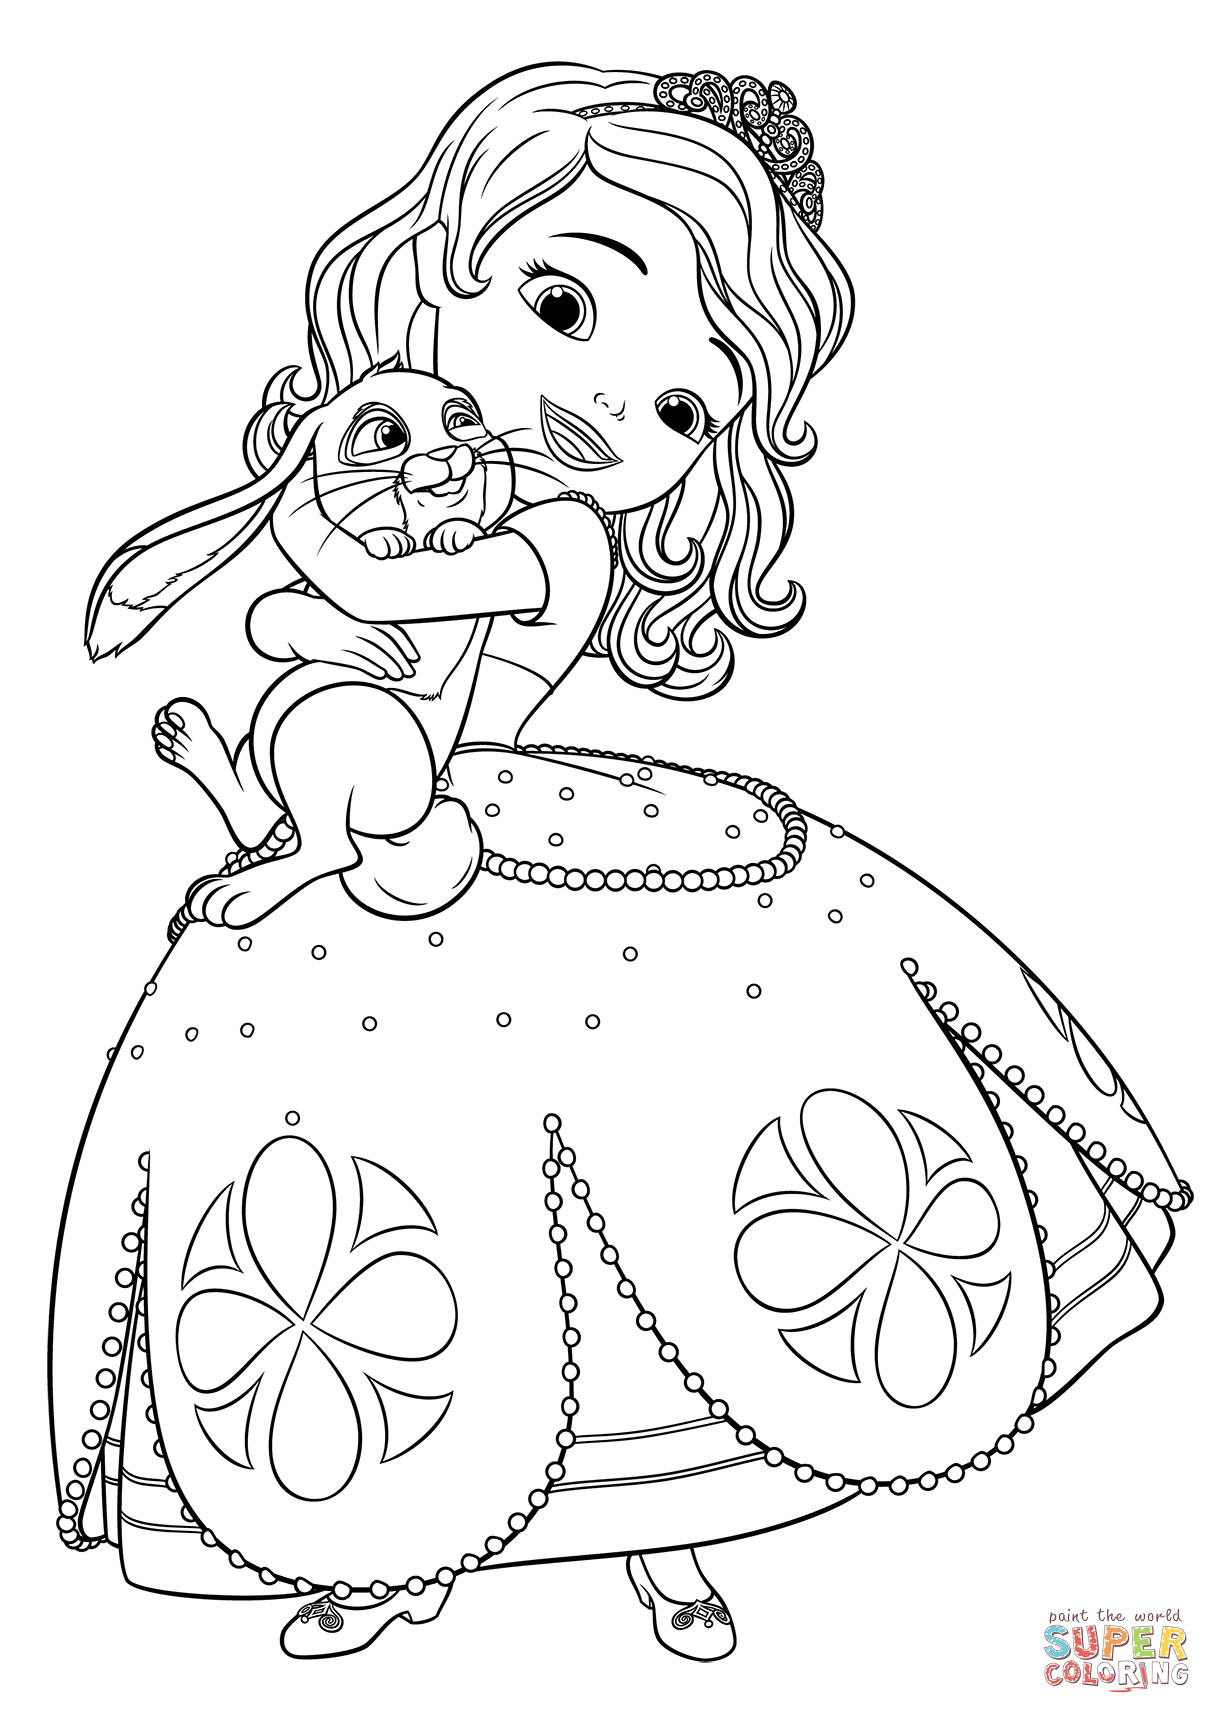 Sofia The First Printable Coloring Pages
 Sofia and Clover coloring page